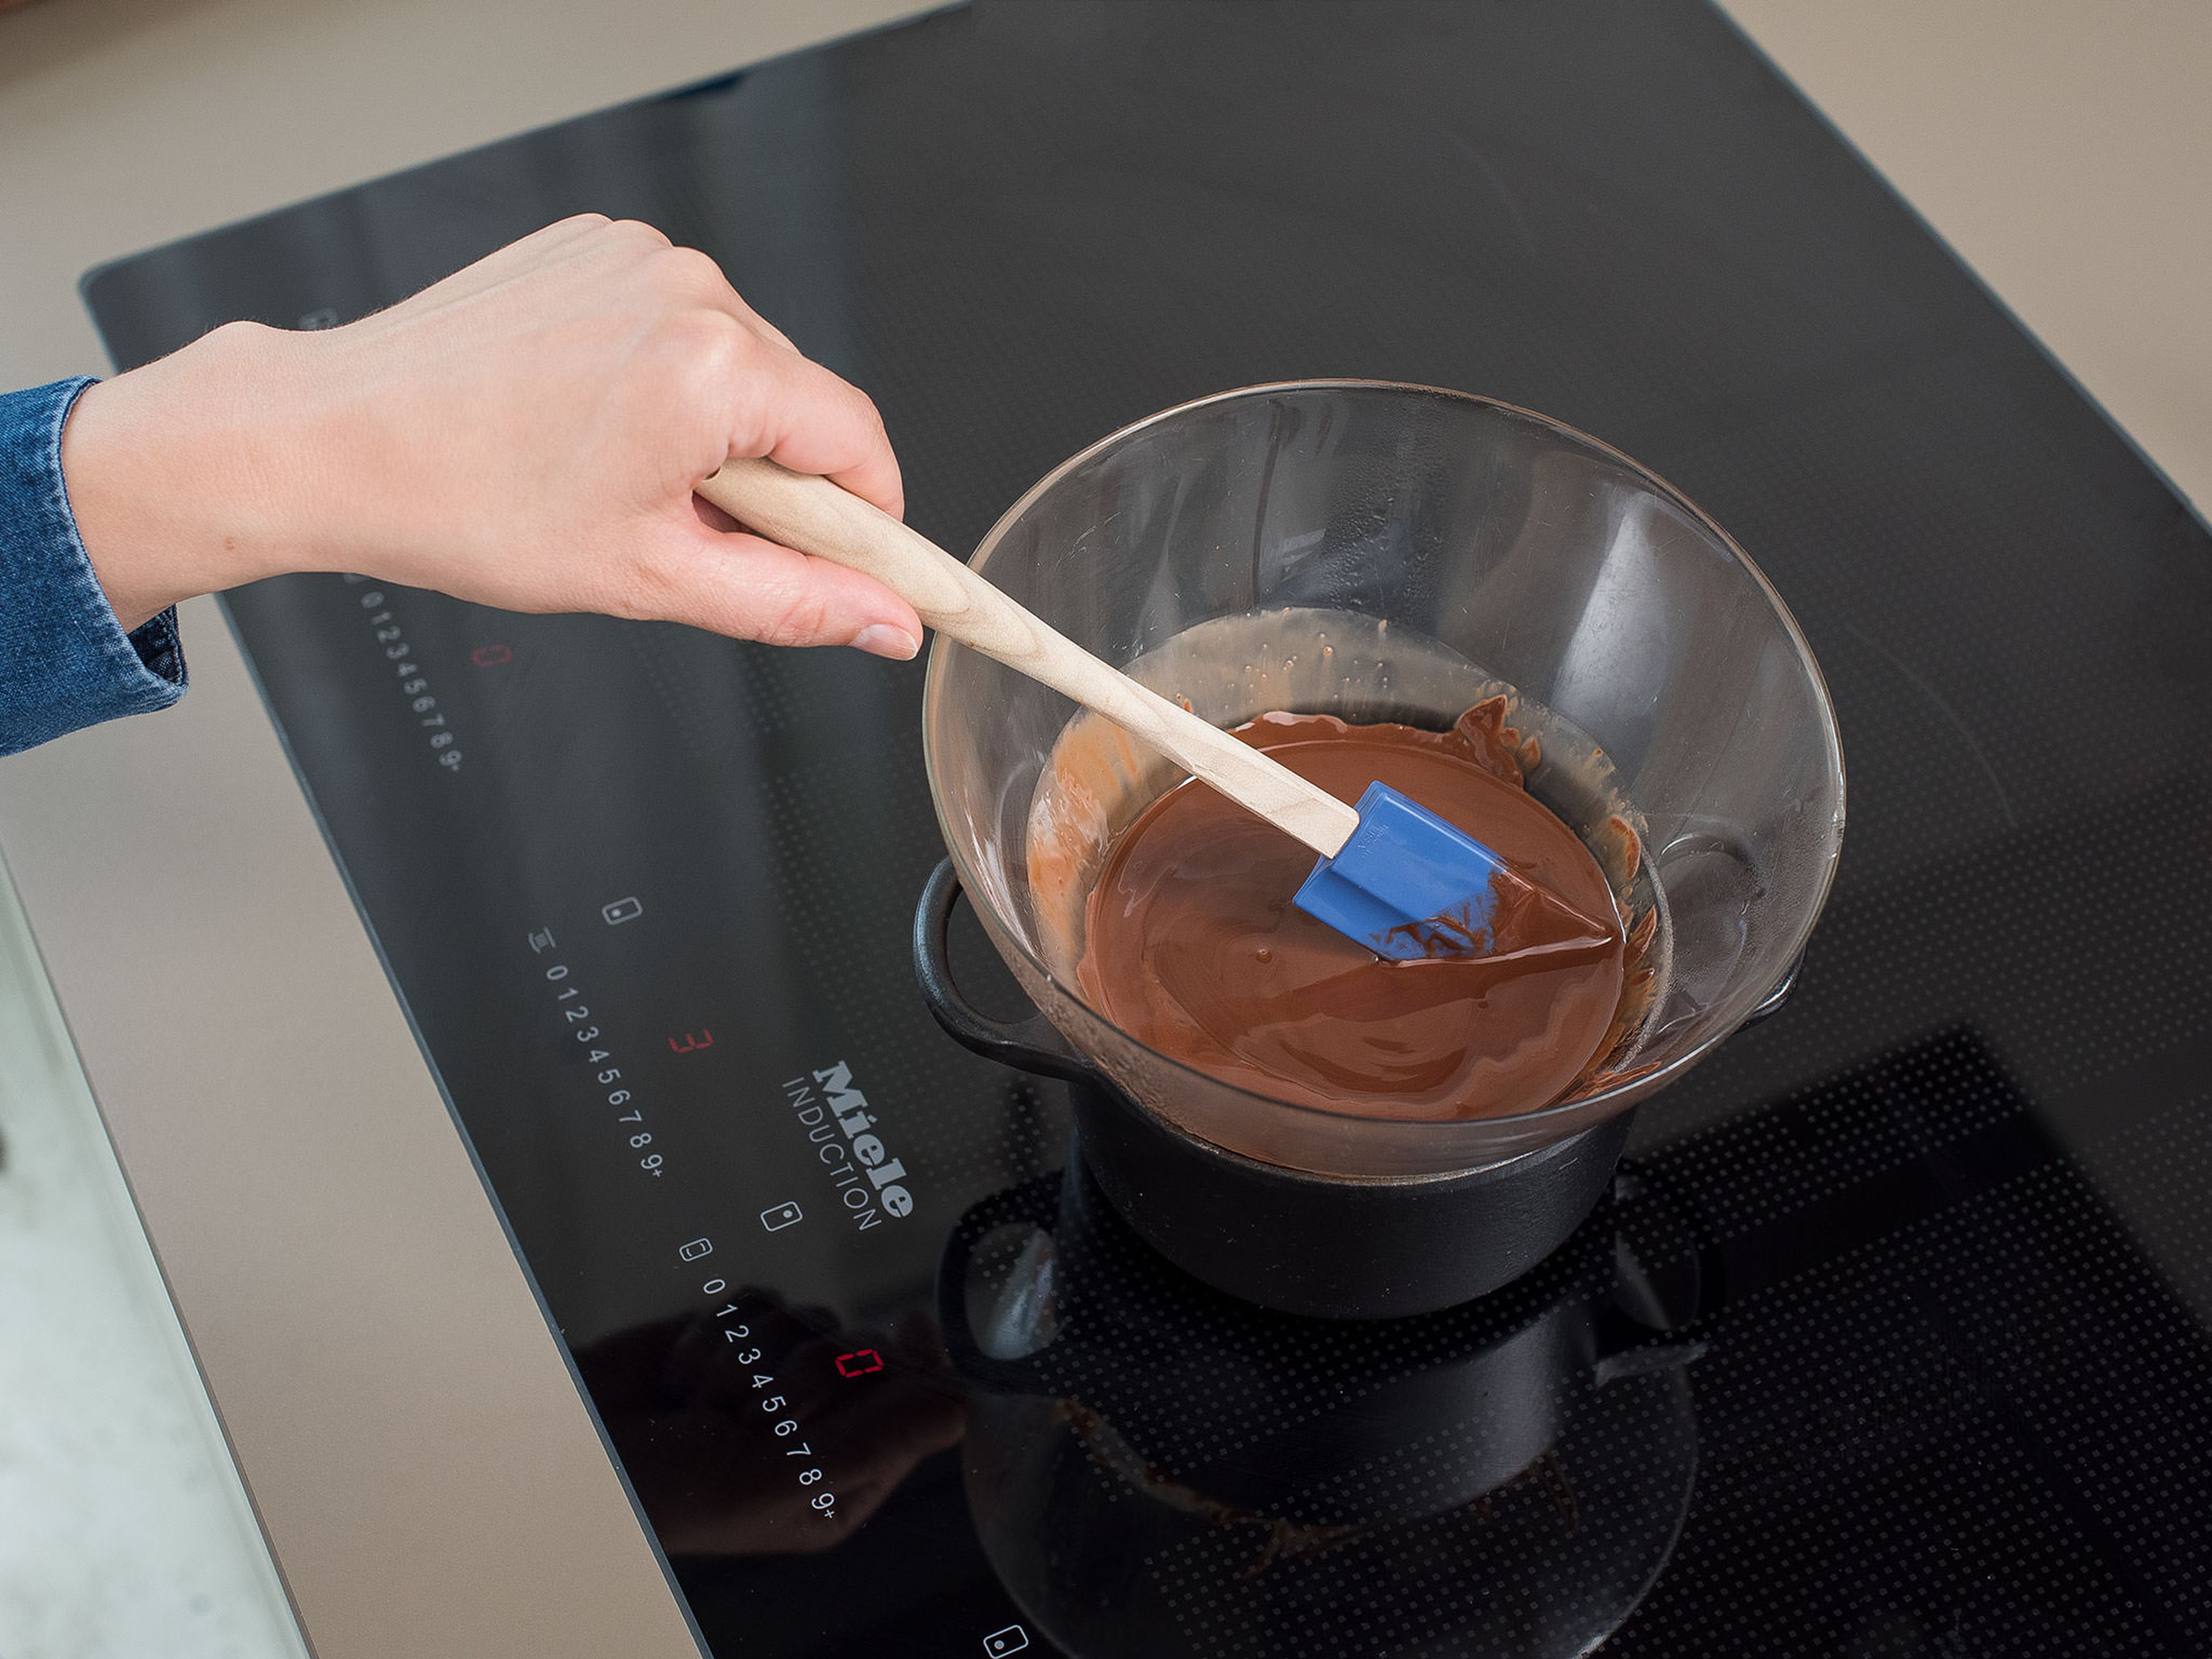 For the glaze, break some of the remaining chocolate into pieces and melt together with the coconut oil in a heatproof bowl set over a pot of simmering water. Stir gently until melted. Remove from the heat and let cool down slightly to thicken.